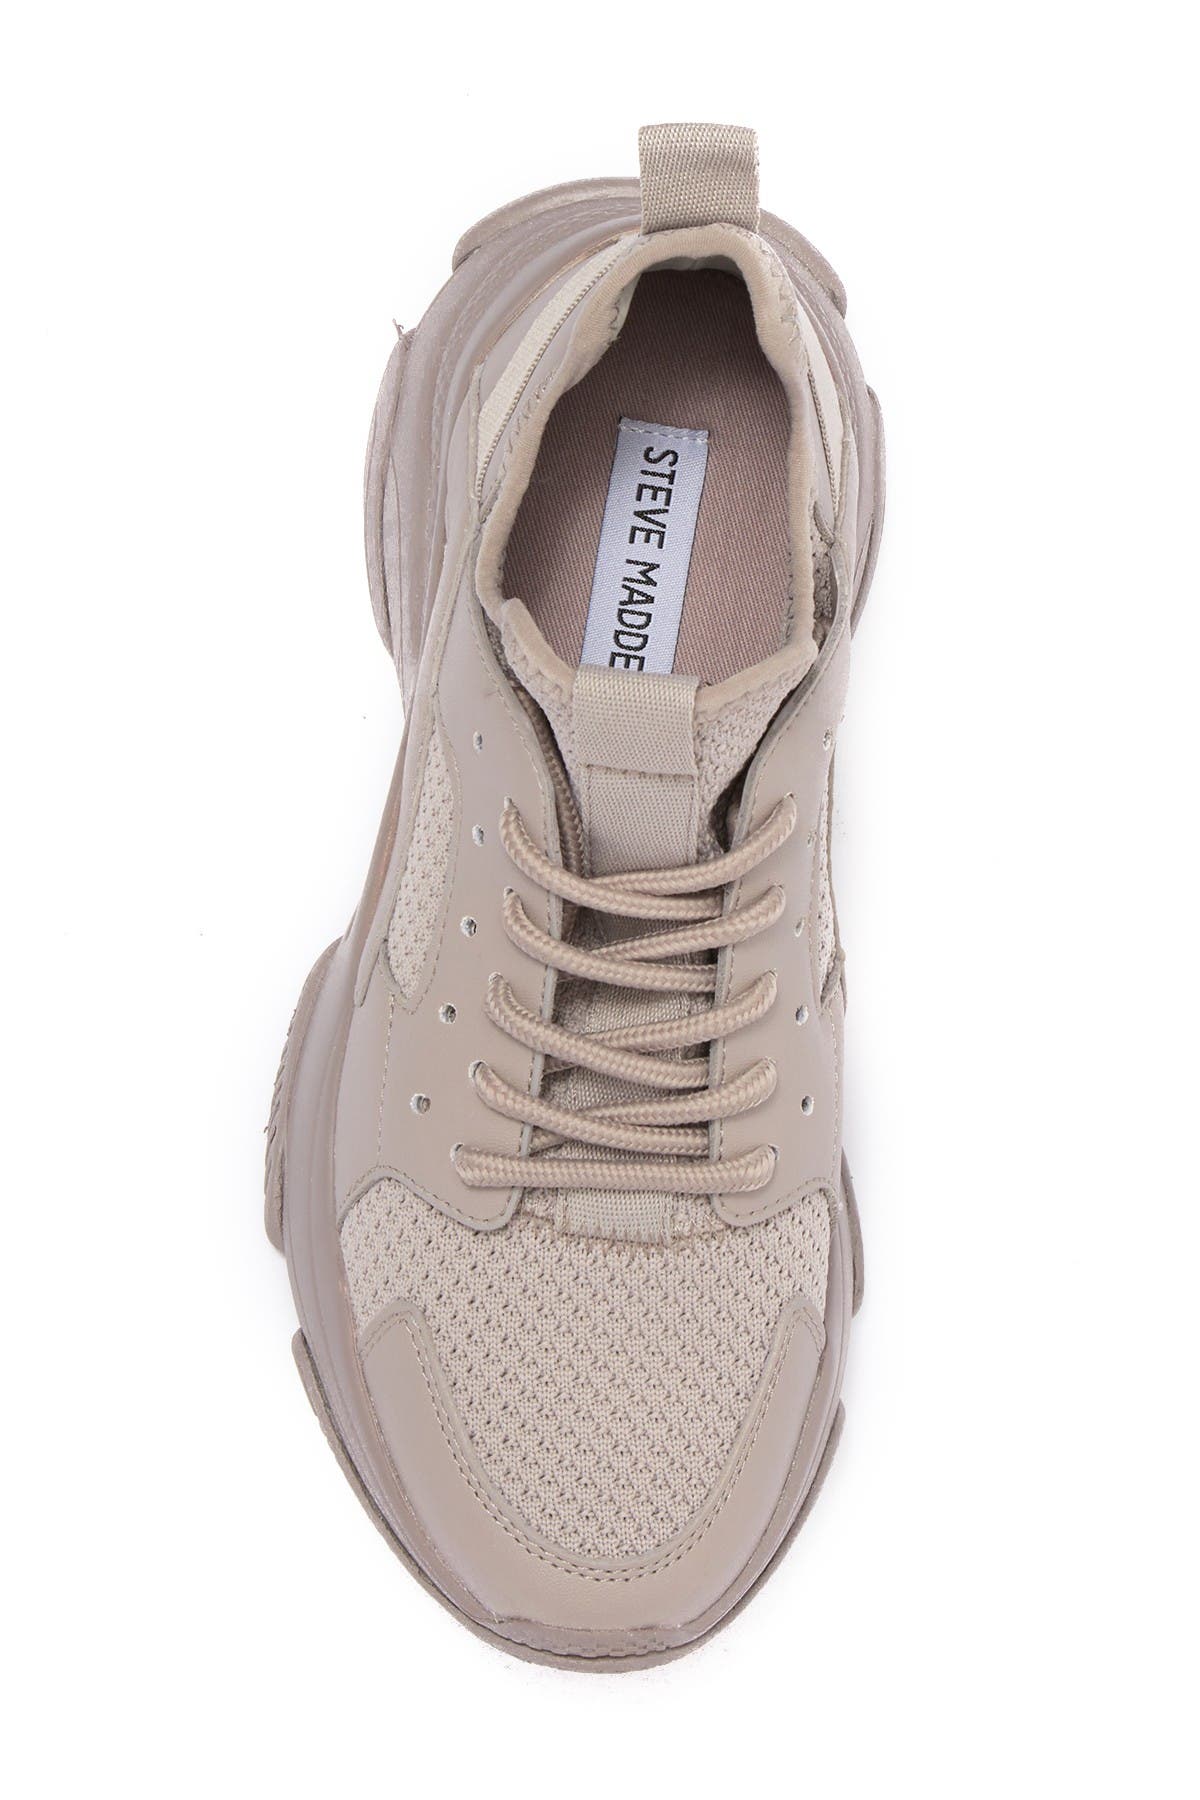 steve madden arelle exaggerated sole sneaker